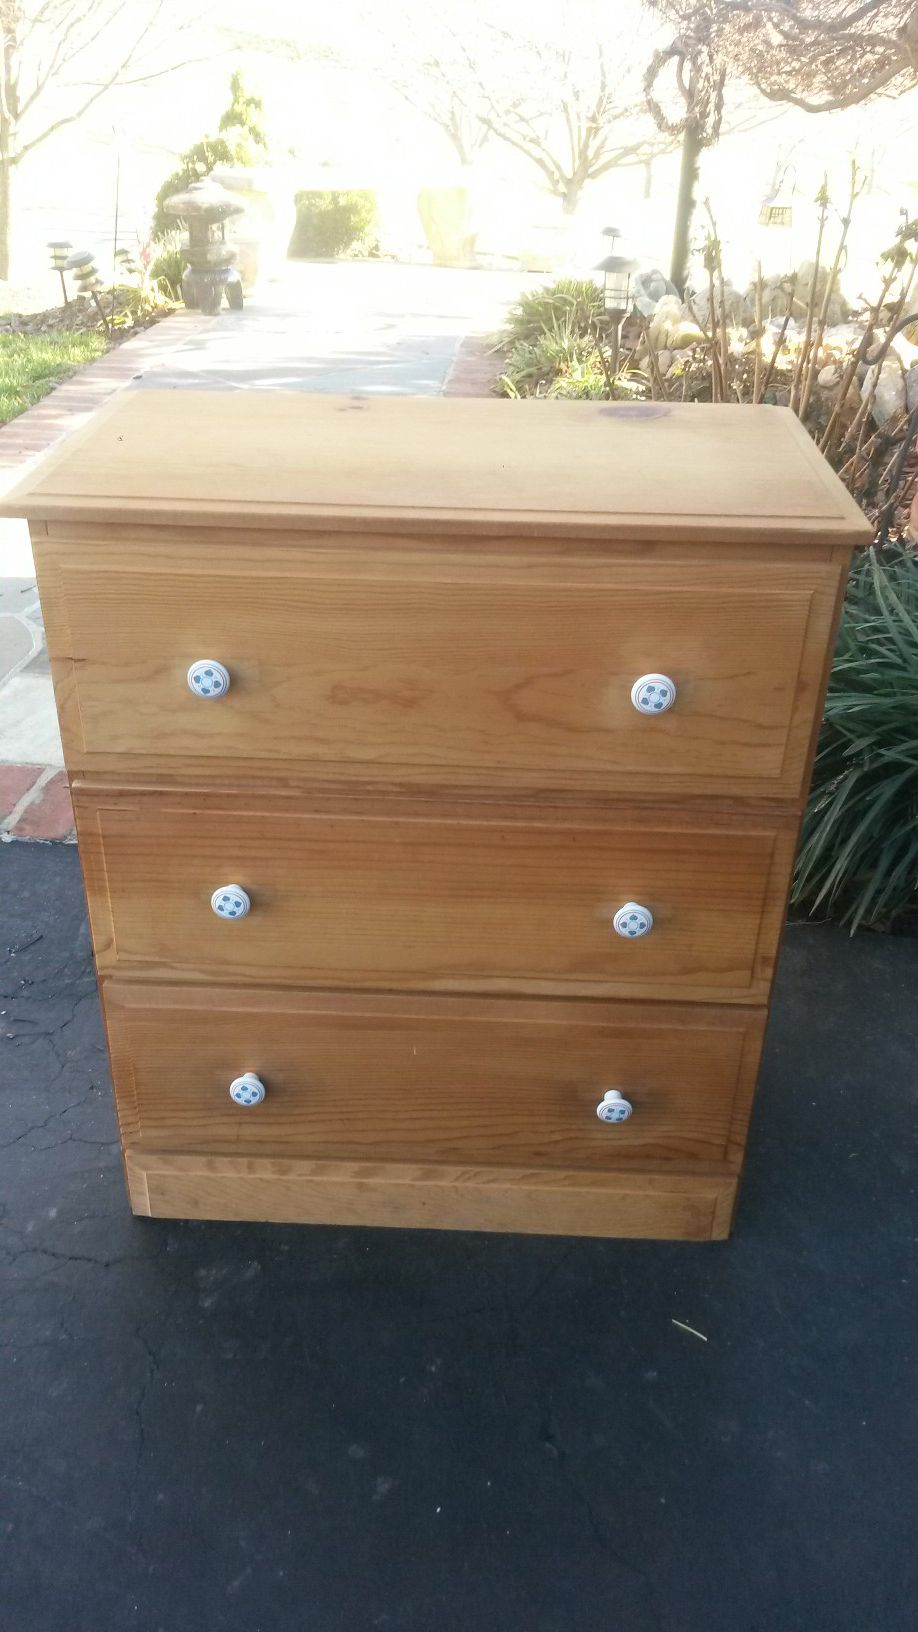 New 3 drawer solid wood chest